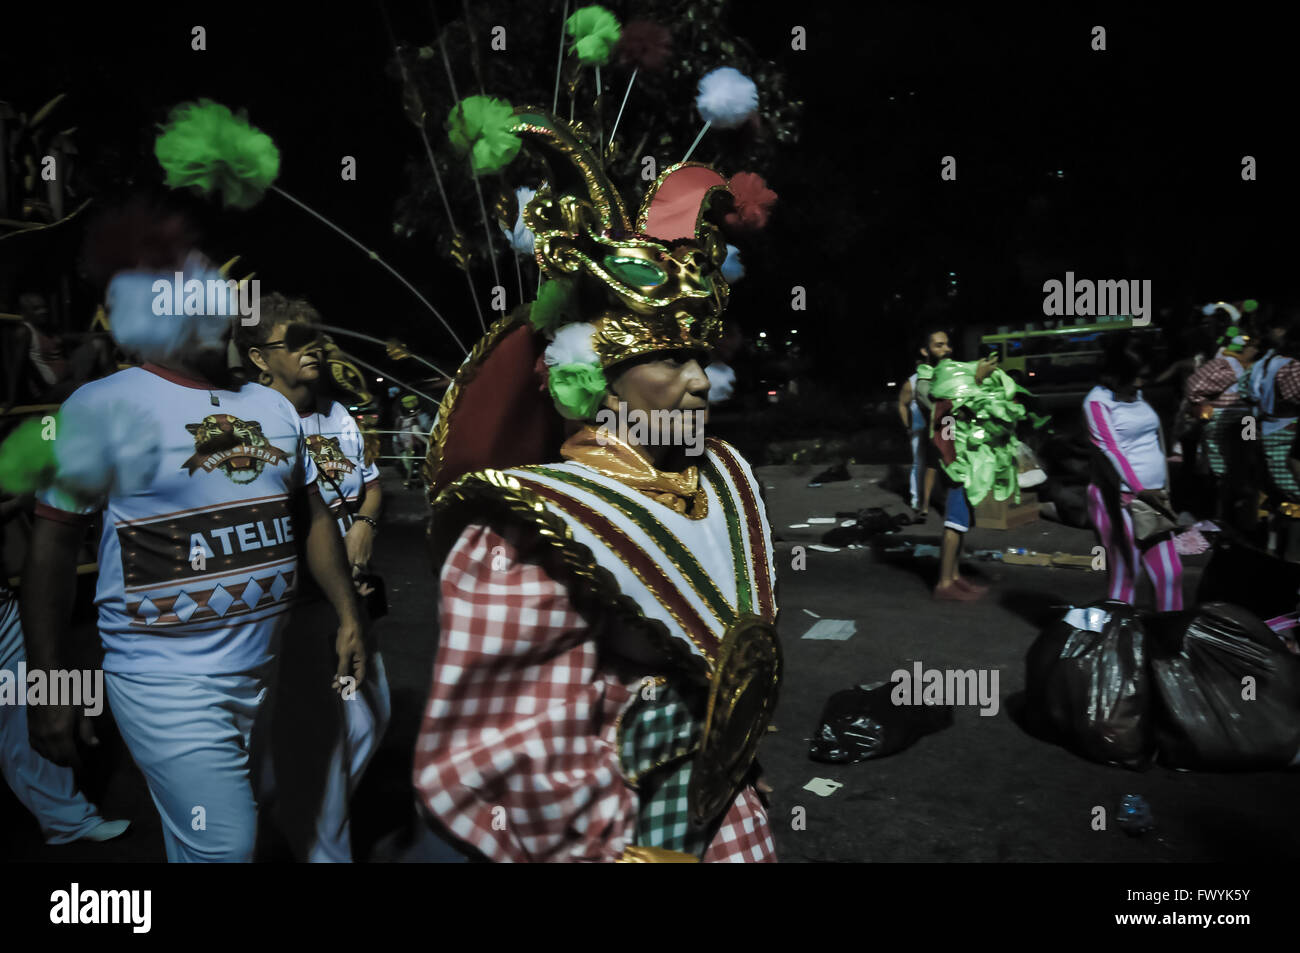 performer of Rio Carnival at the concentration area awaiting to parade. Performers dressing up at the concentrationa rea. Stock Photo